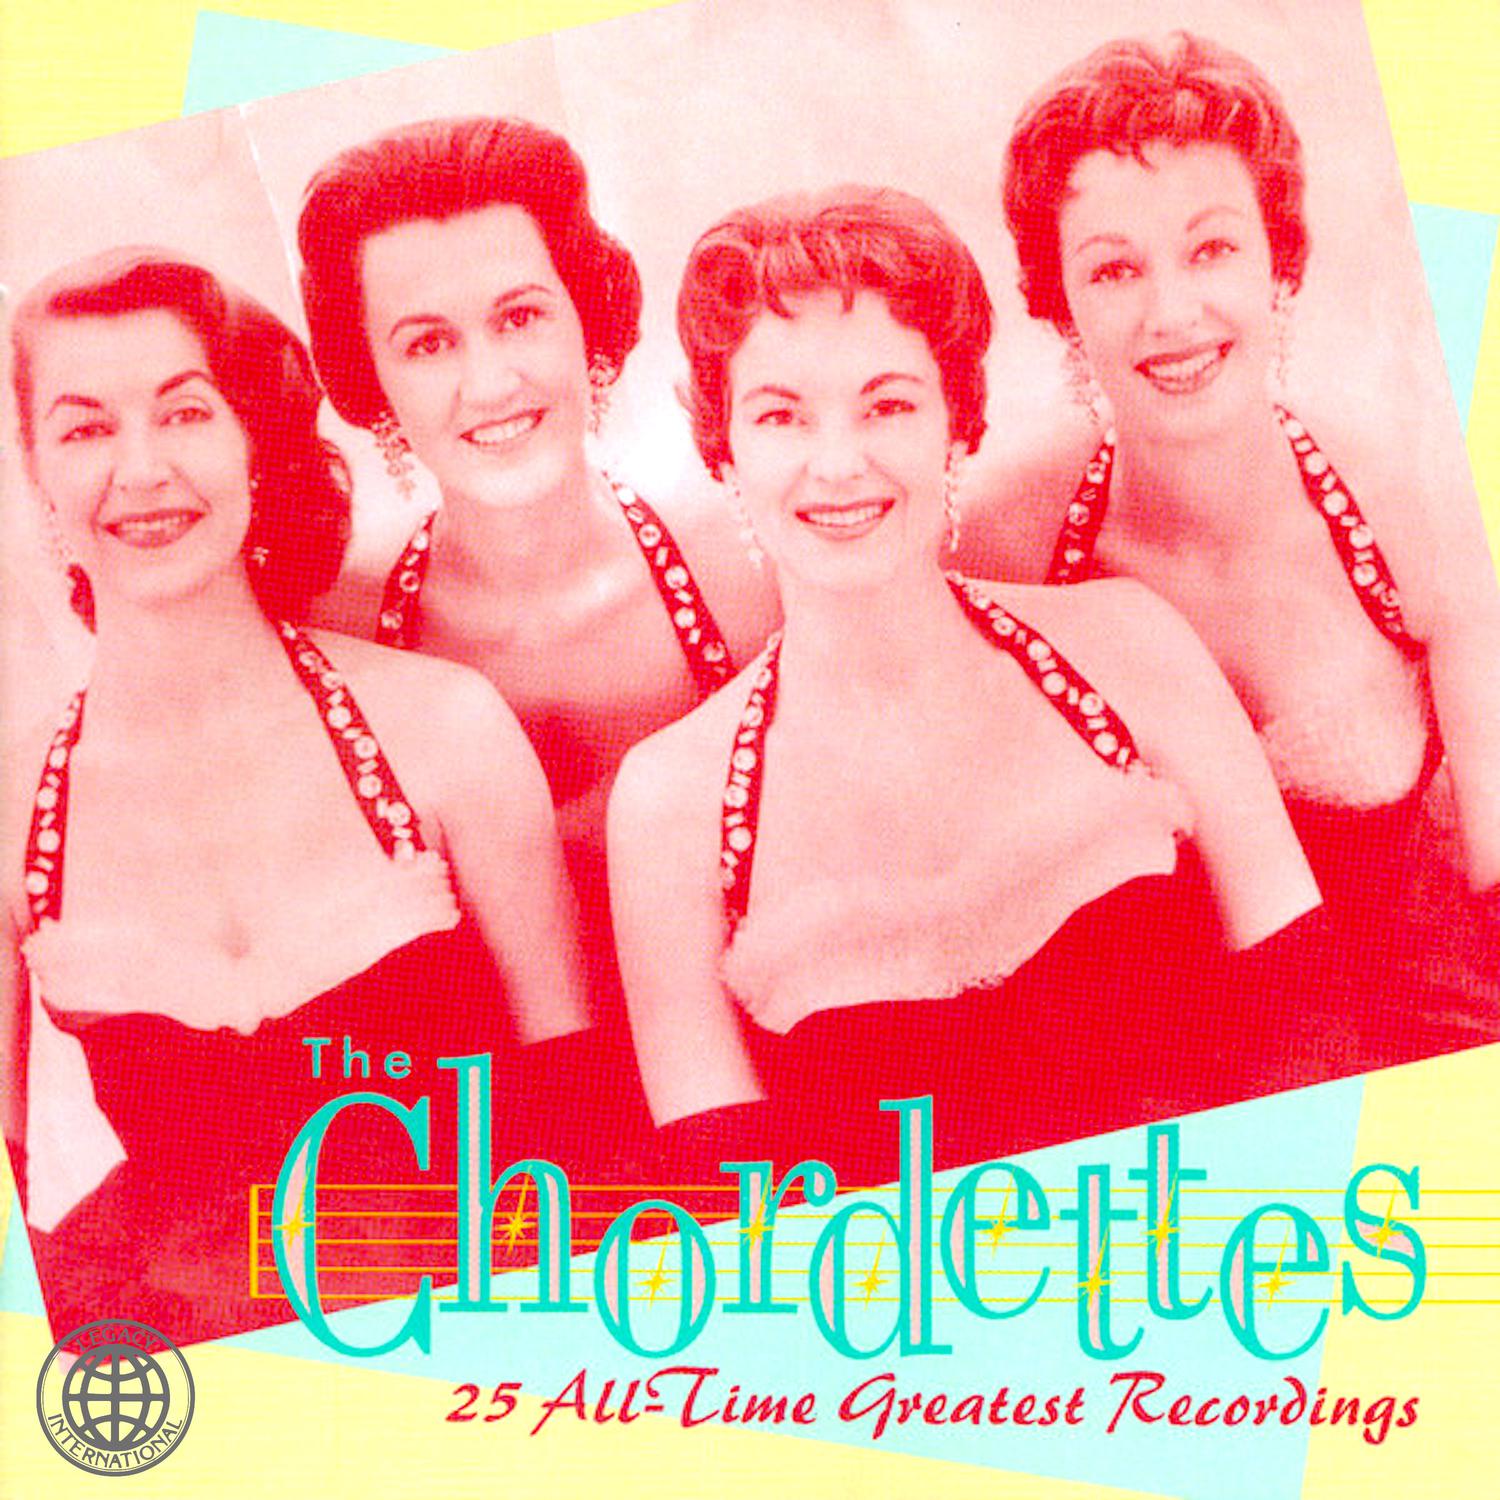 The Chordettes - That's Old Fashioned (That's the Way It Should Be)